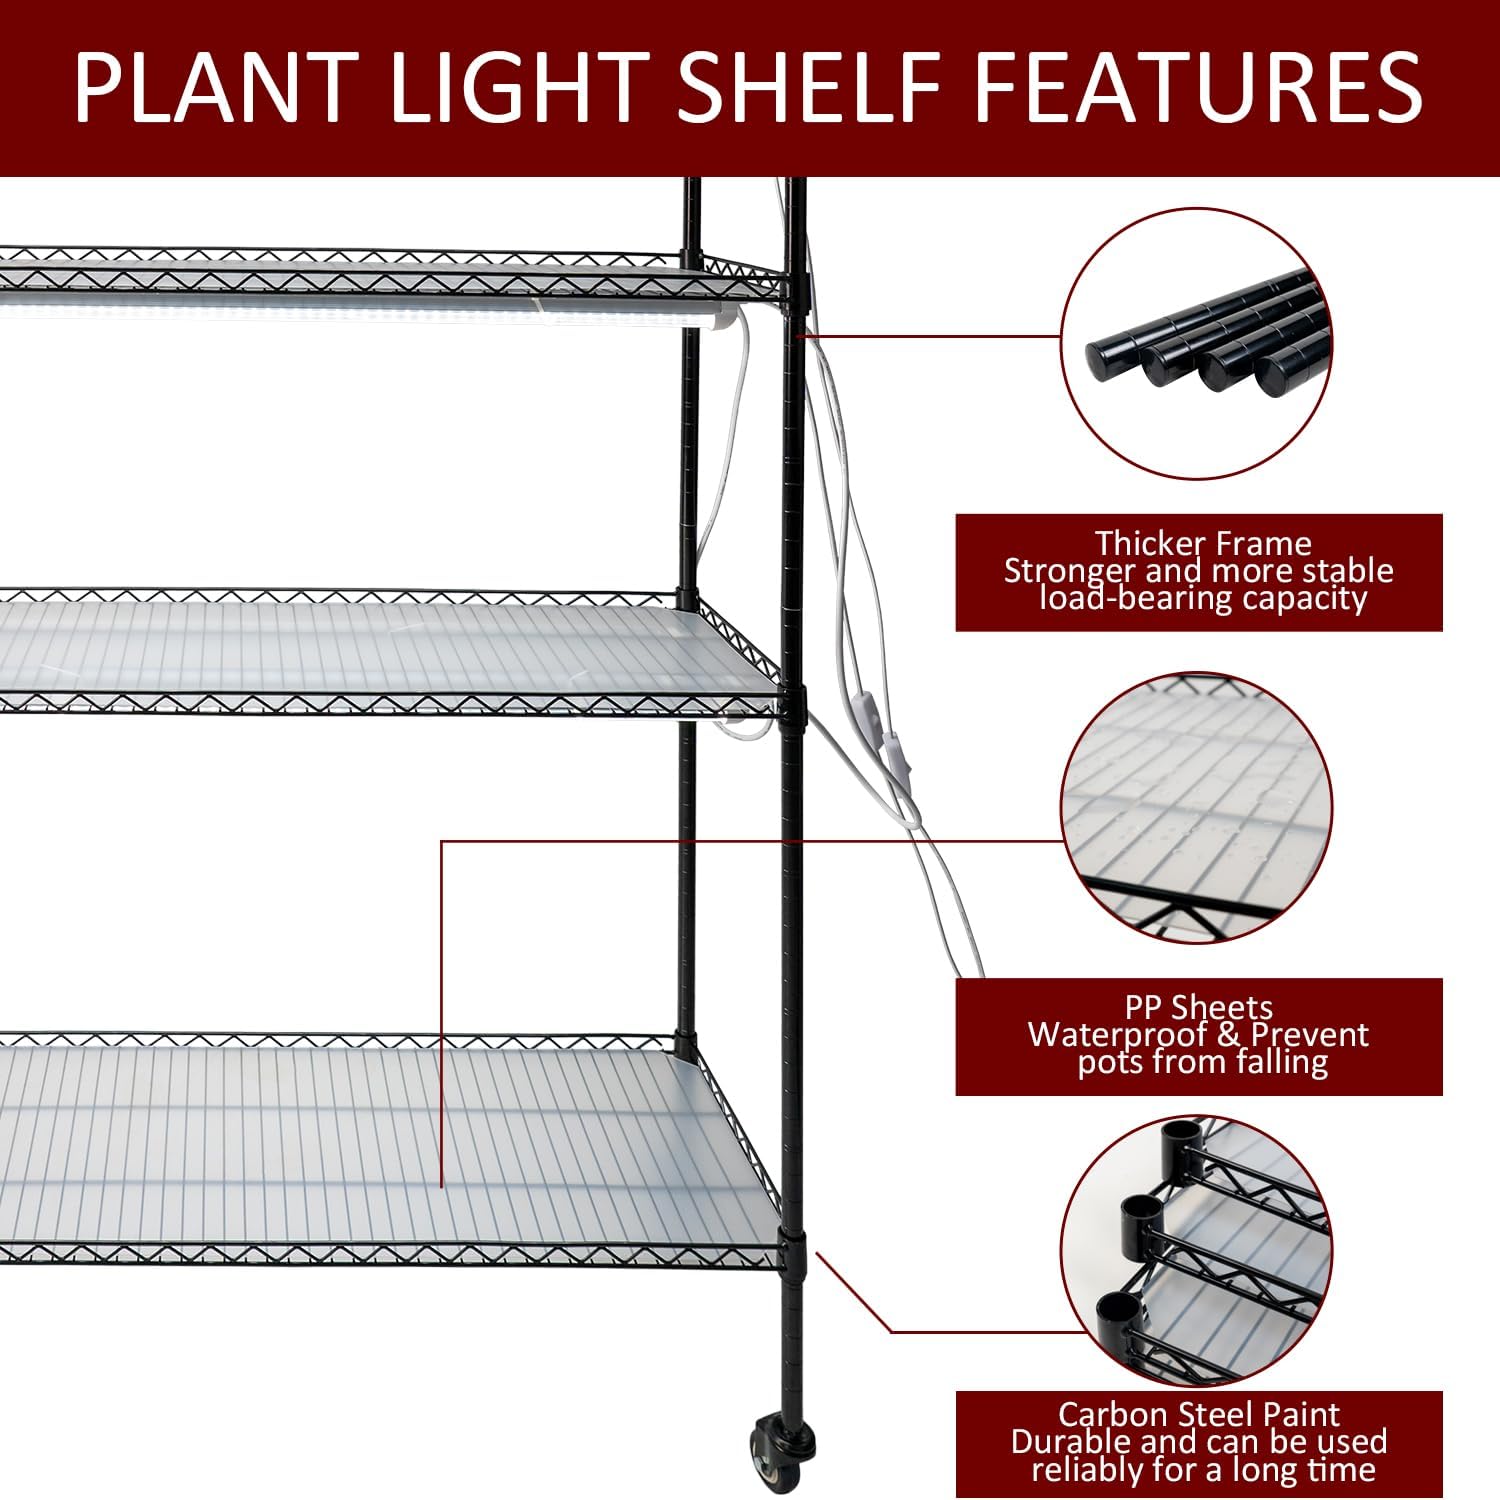 4-Tier Portable Metal Plant Stand with Wheels